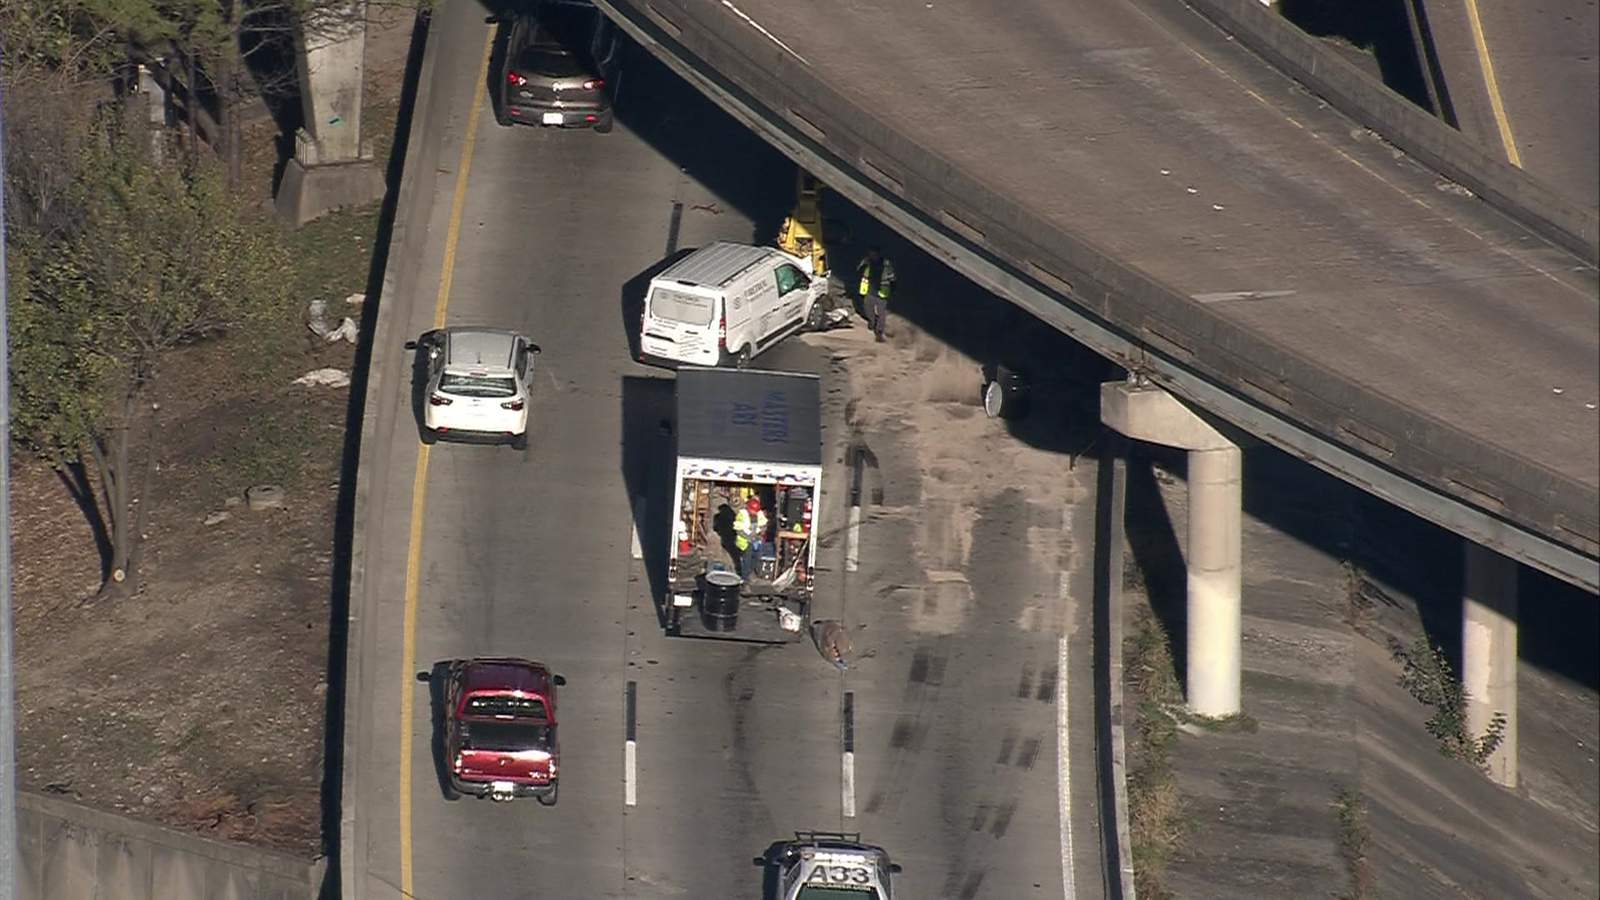 Part of Pierce Elevated closed near downtown Houston after crane hits bridge